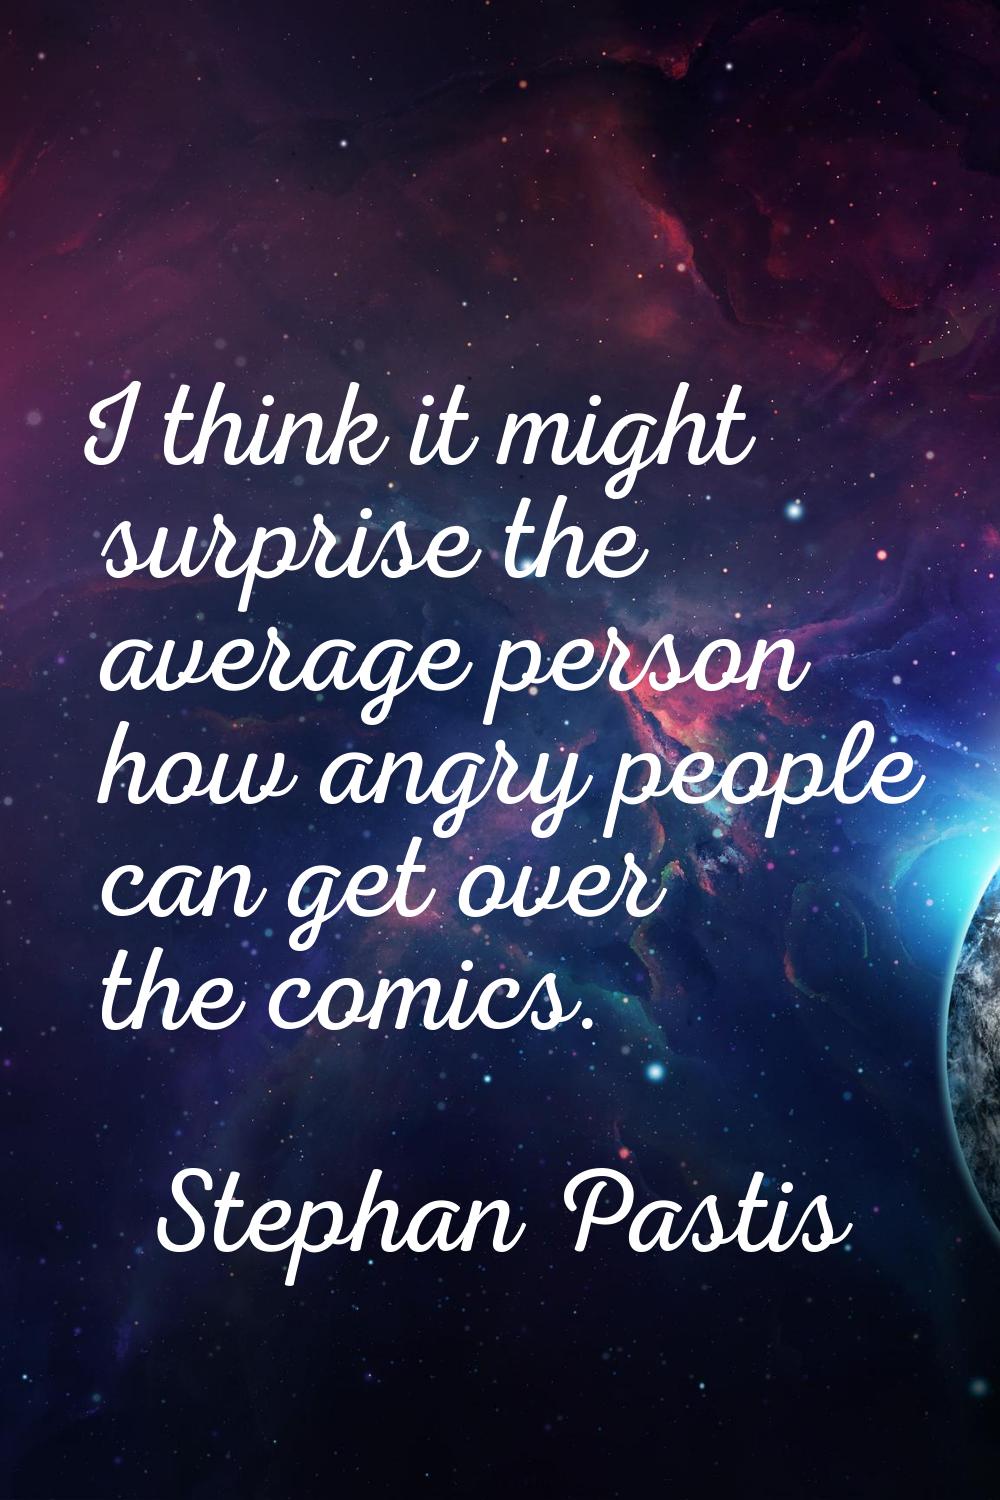 I think it might surprise the average person how angry people can get over the comics.